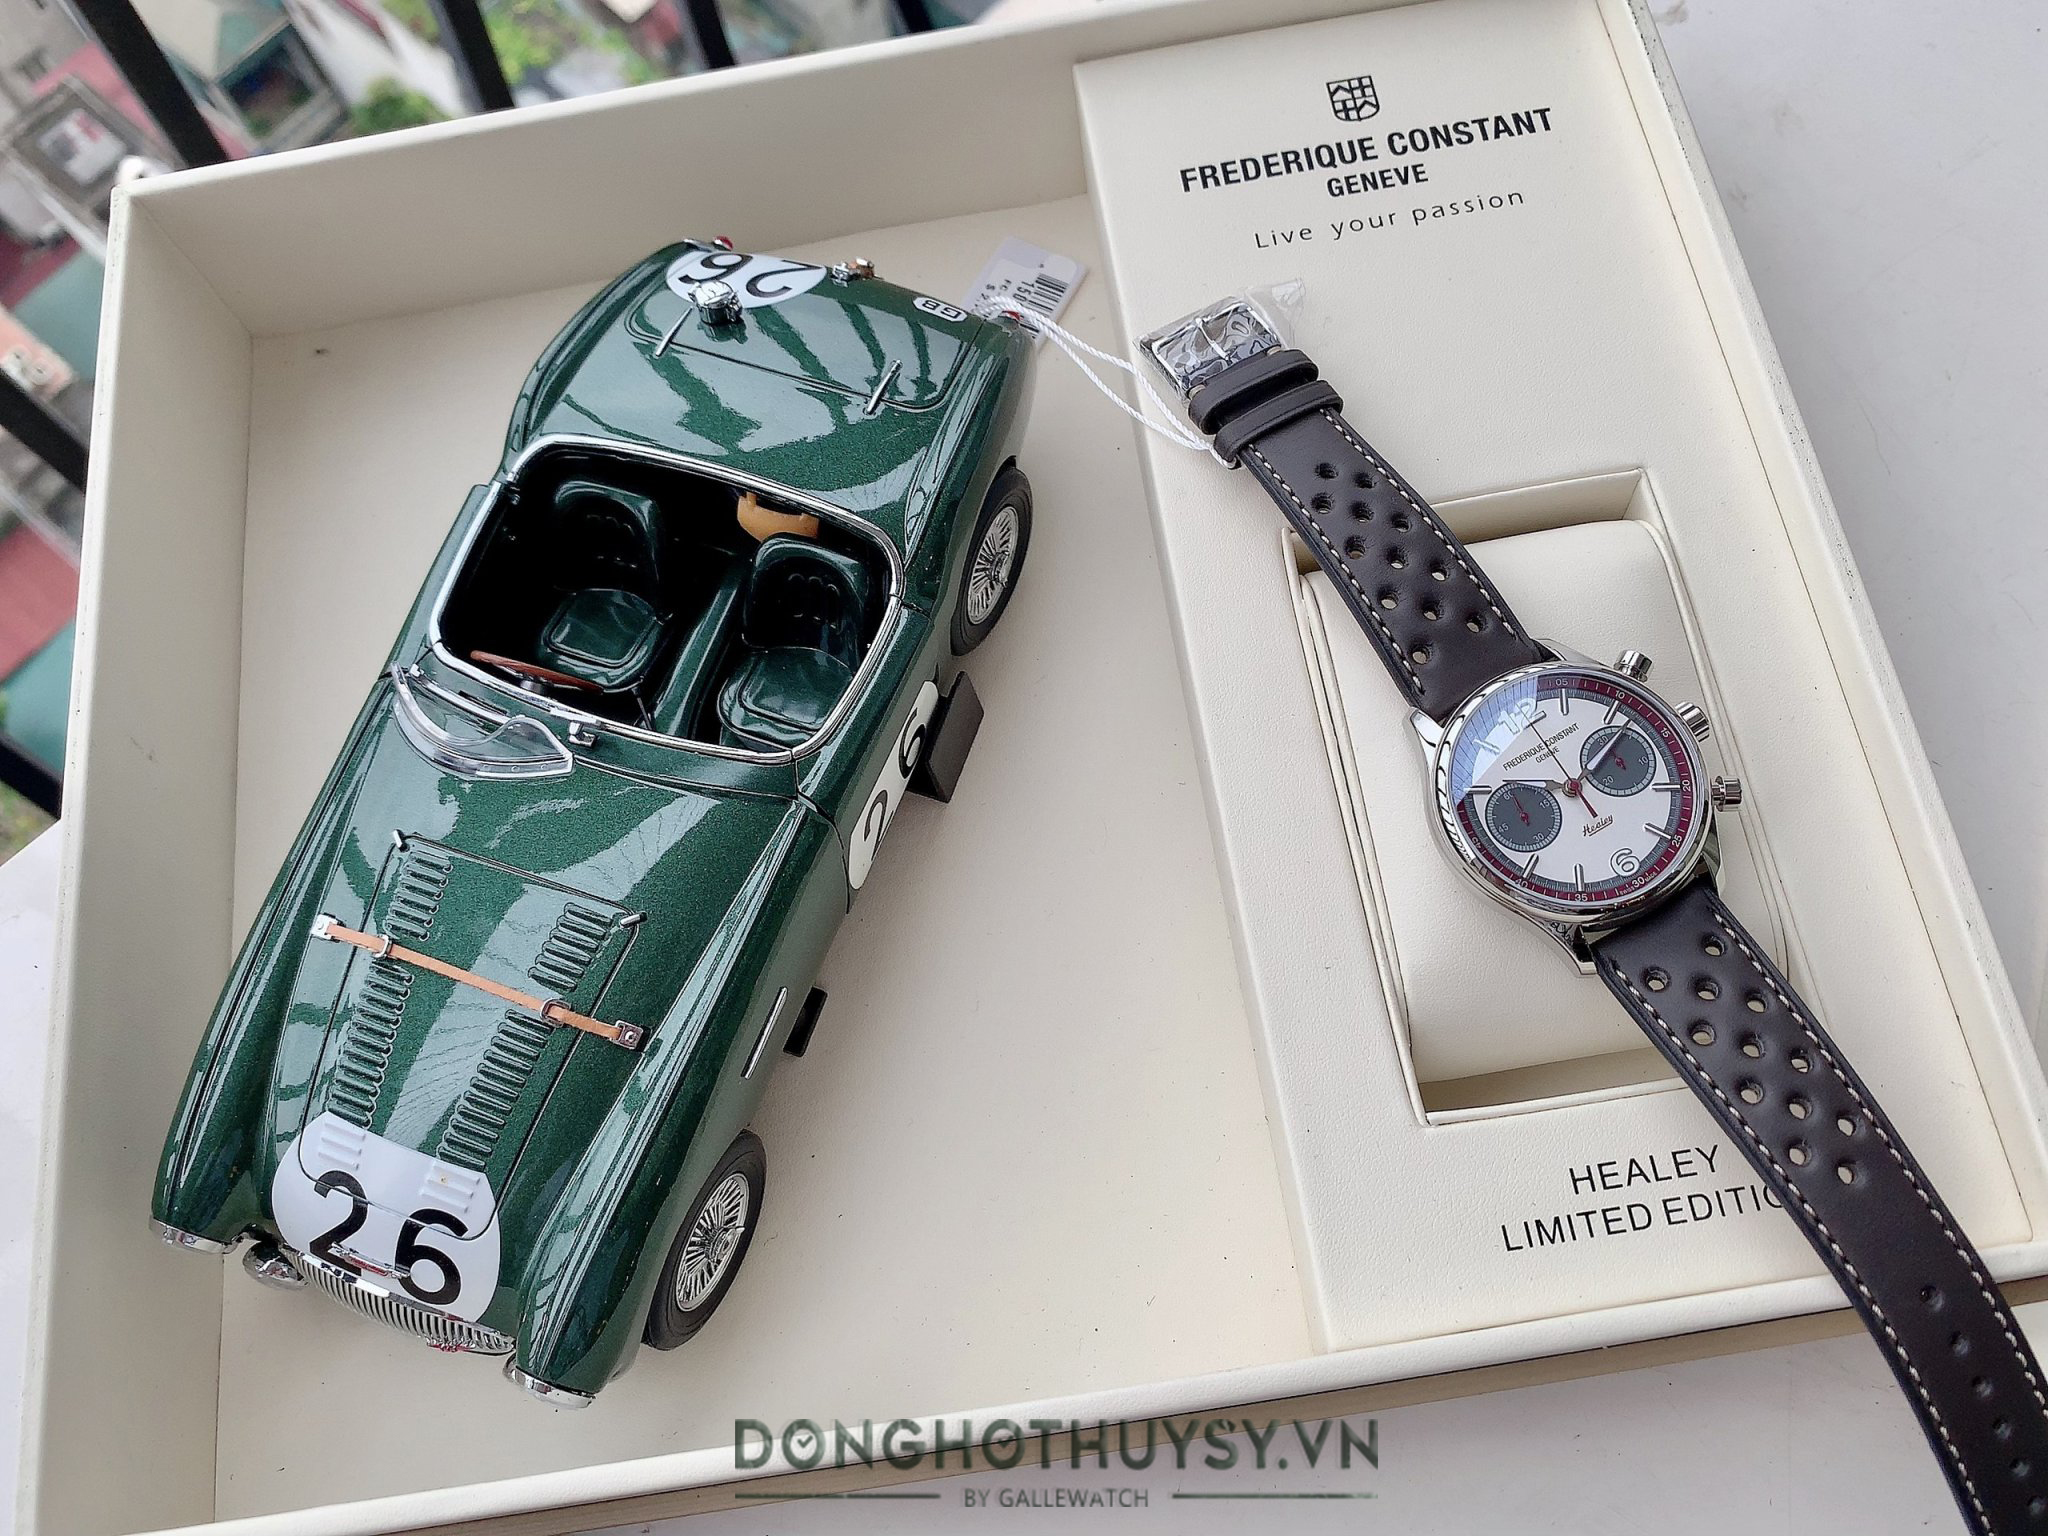 FREDERIQUE CONSTANT VINTAGE RALLY HEALEY CHRONOGRAPH fc-397-1